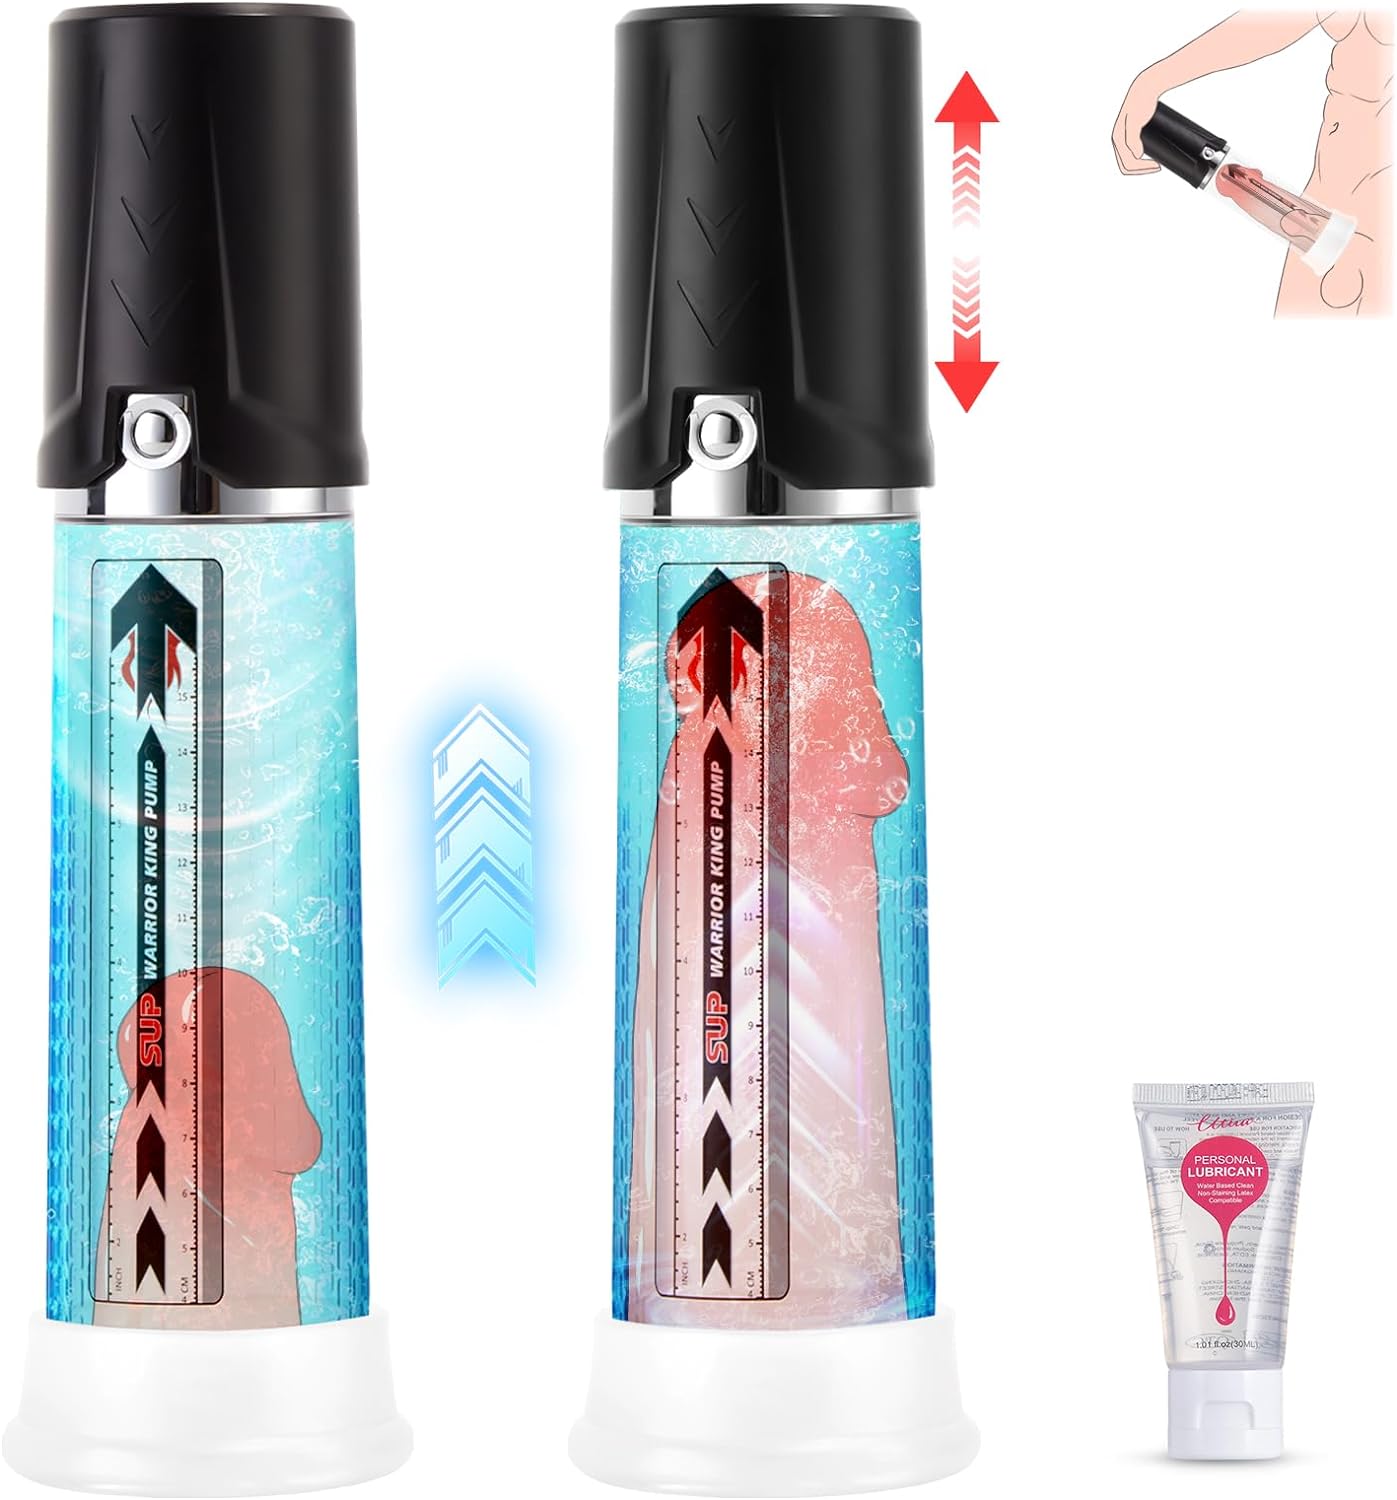 Manual Penis Pump Penis Enlarger - Male Sex Toys Penis Enlargement Extend Pumps & Enlargers to Enlarge Penis and Improve Erection for Men Adult Toys & Games, Only Need One Hand to Operate